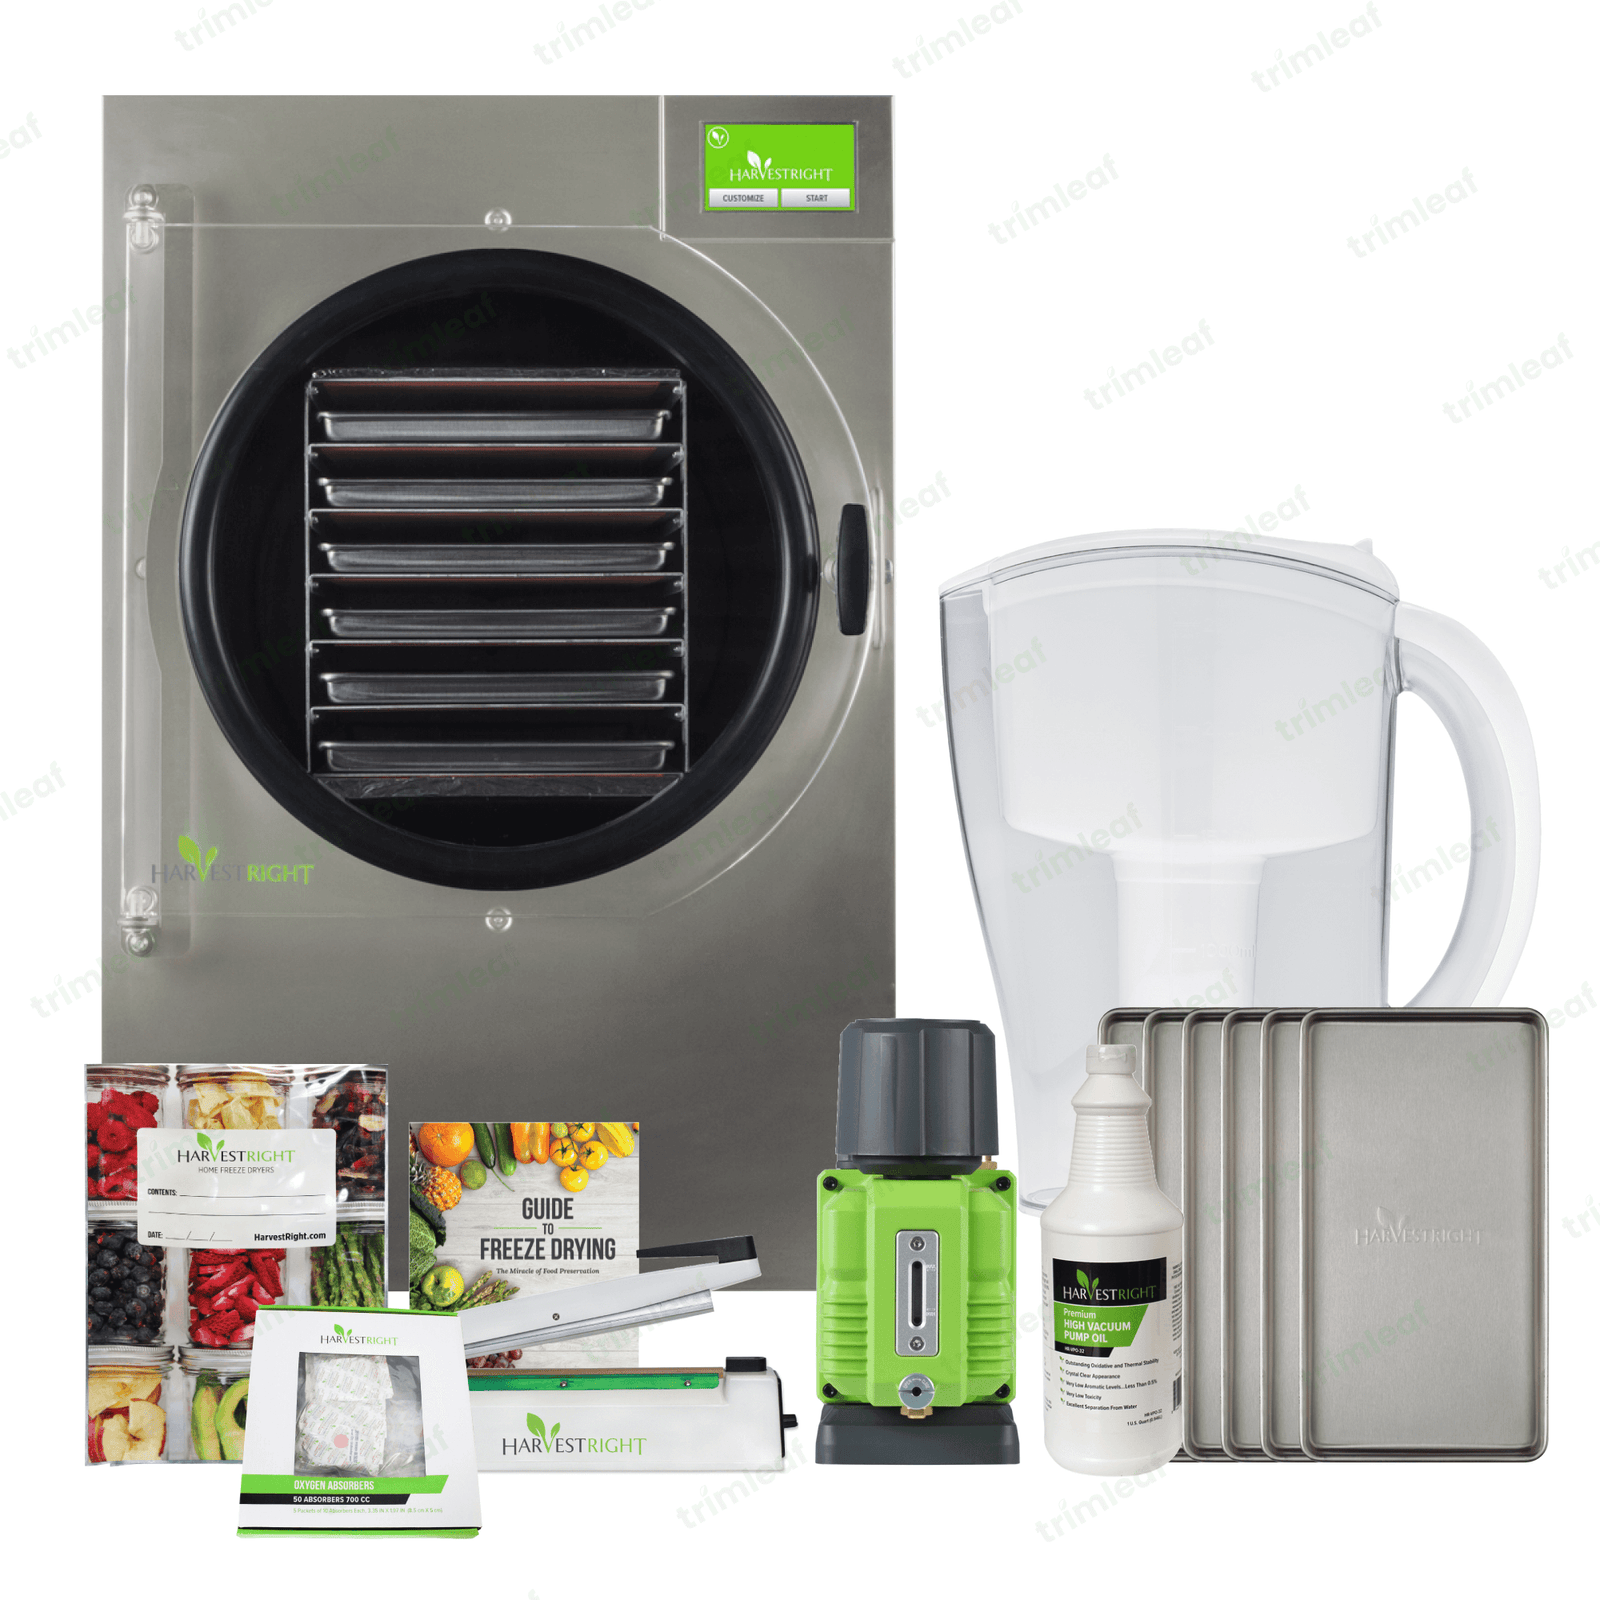 https://cdn.shopify.com/s/files/1/1383/1731/files/harvest-right-harvest-right-6-tray-large-pro-stainless-steel-freeze-dryer-w-mylar-kit-39887973122264_1600x.png?v=1699308937